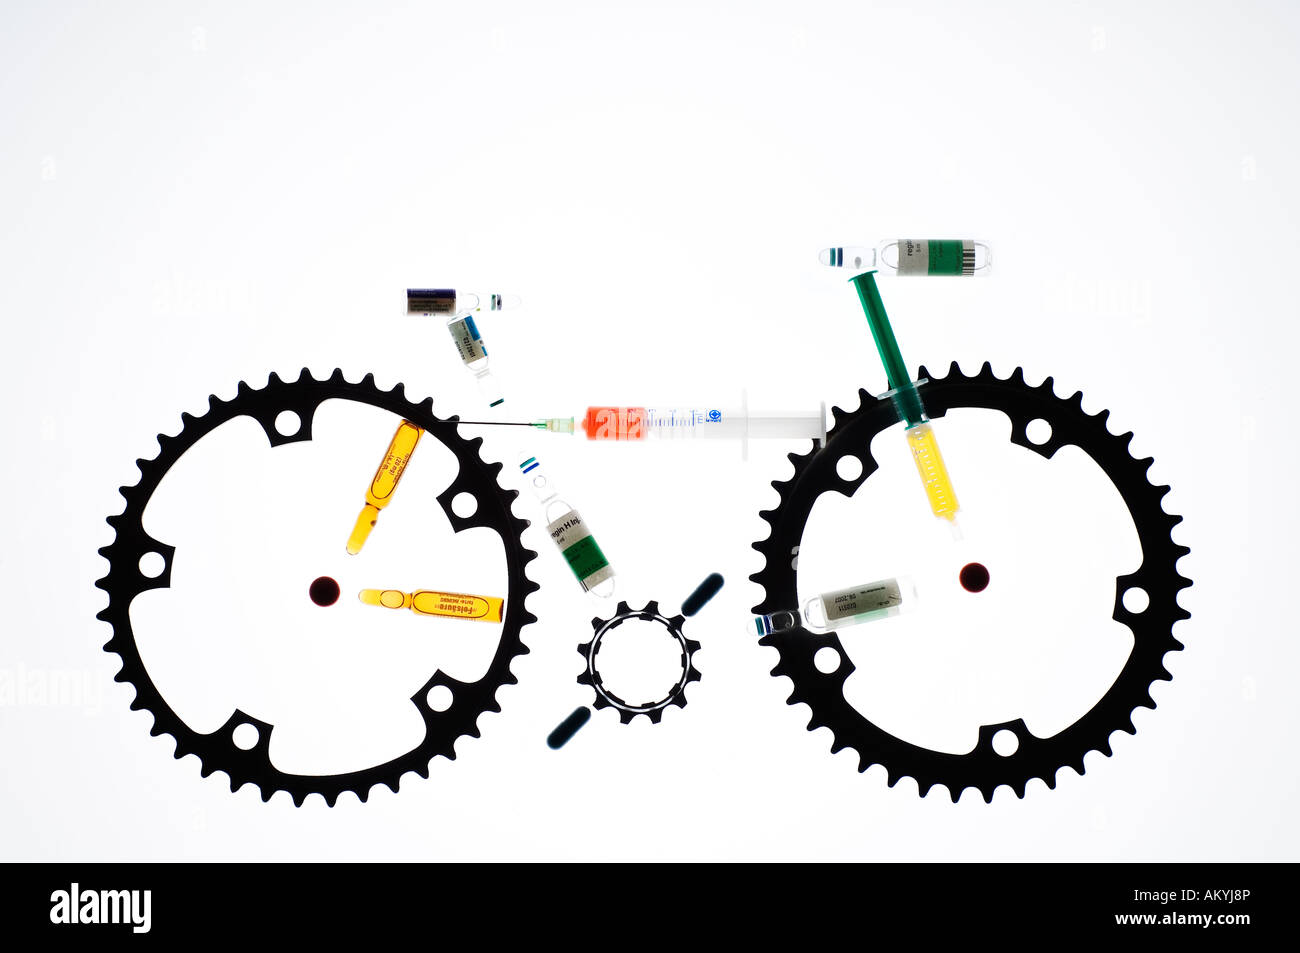 Gear wheels and medicines symbolize medicine abuse (doping) in the cycling. Stock Photo